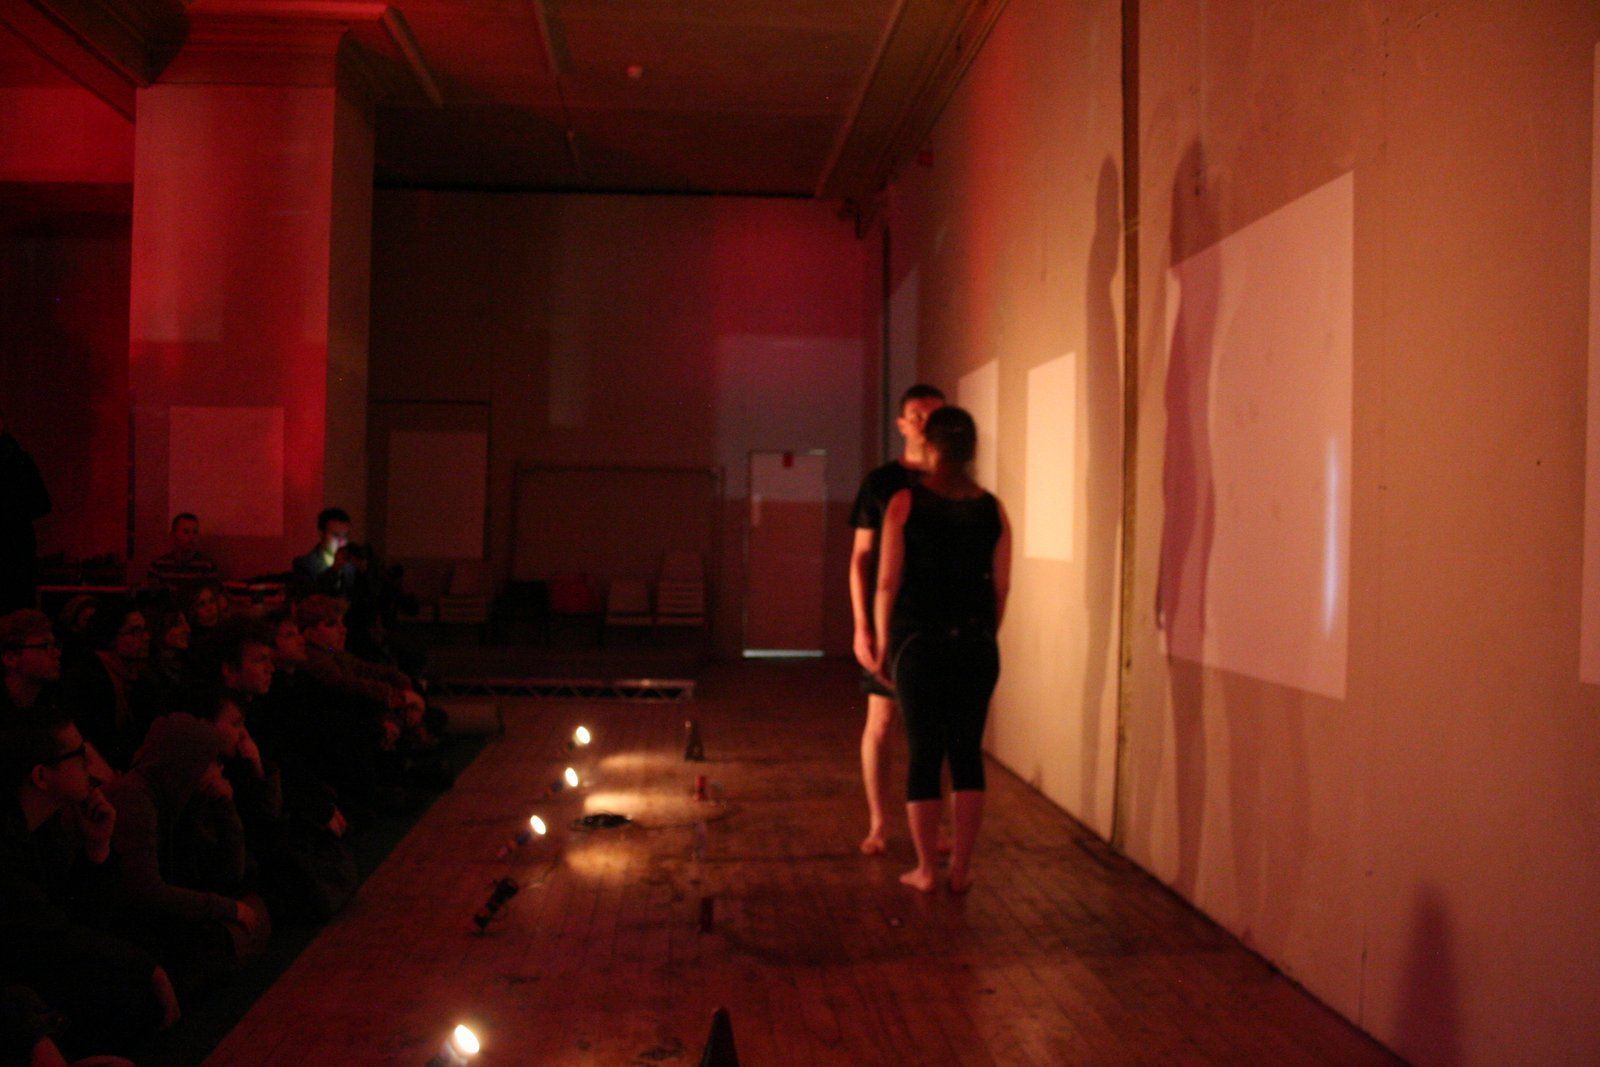 two people are standing on a stage in a dark room .